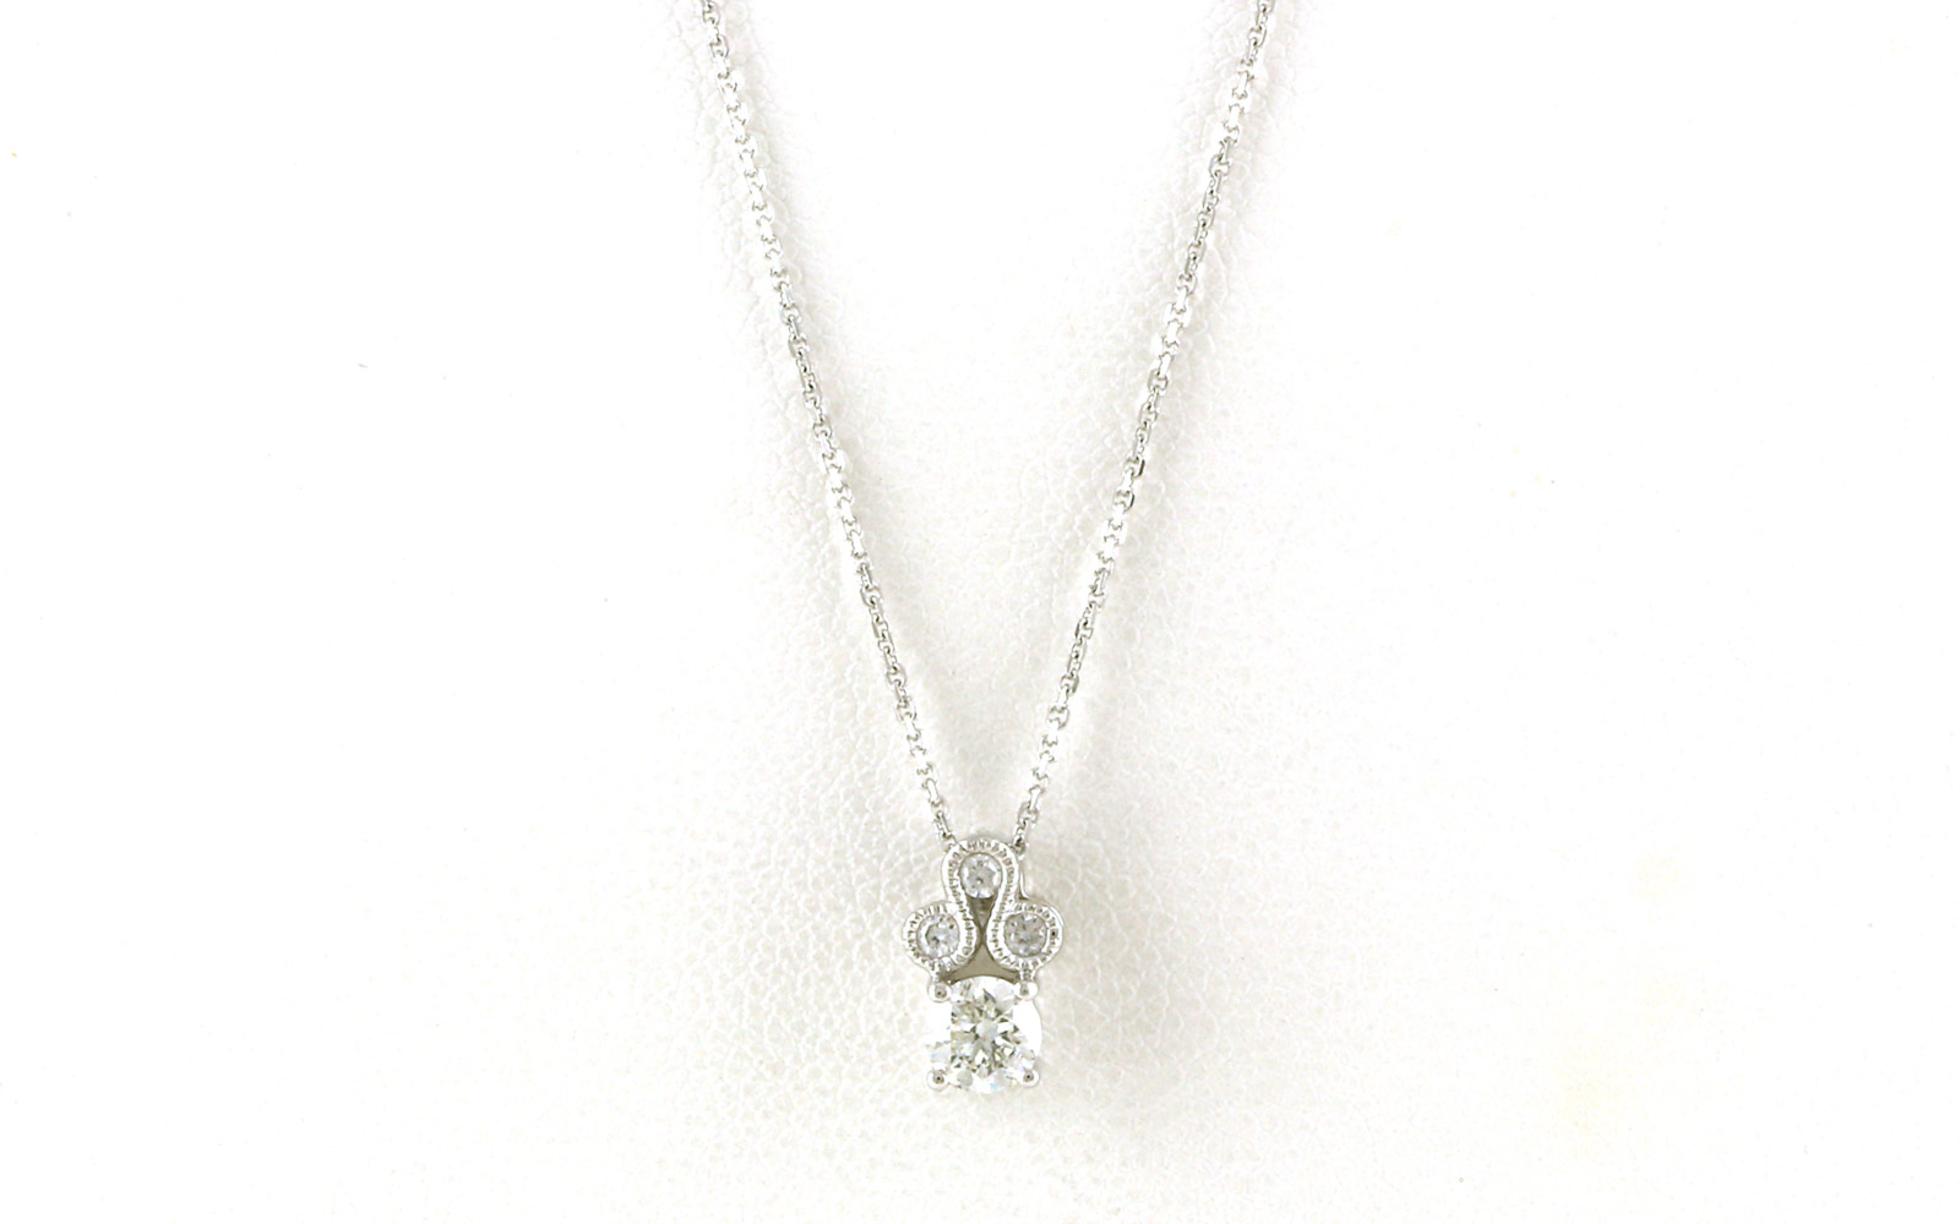 4-Stone Cluster Diamond Necklace with Milgrain Details in White Gold (0.37cts TWT)